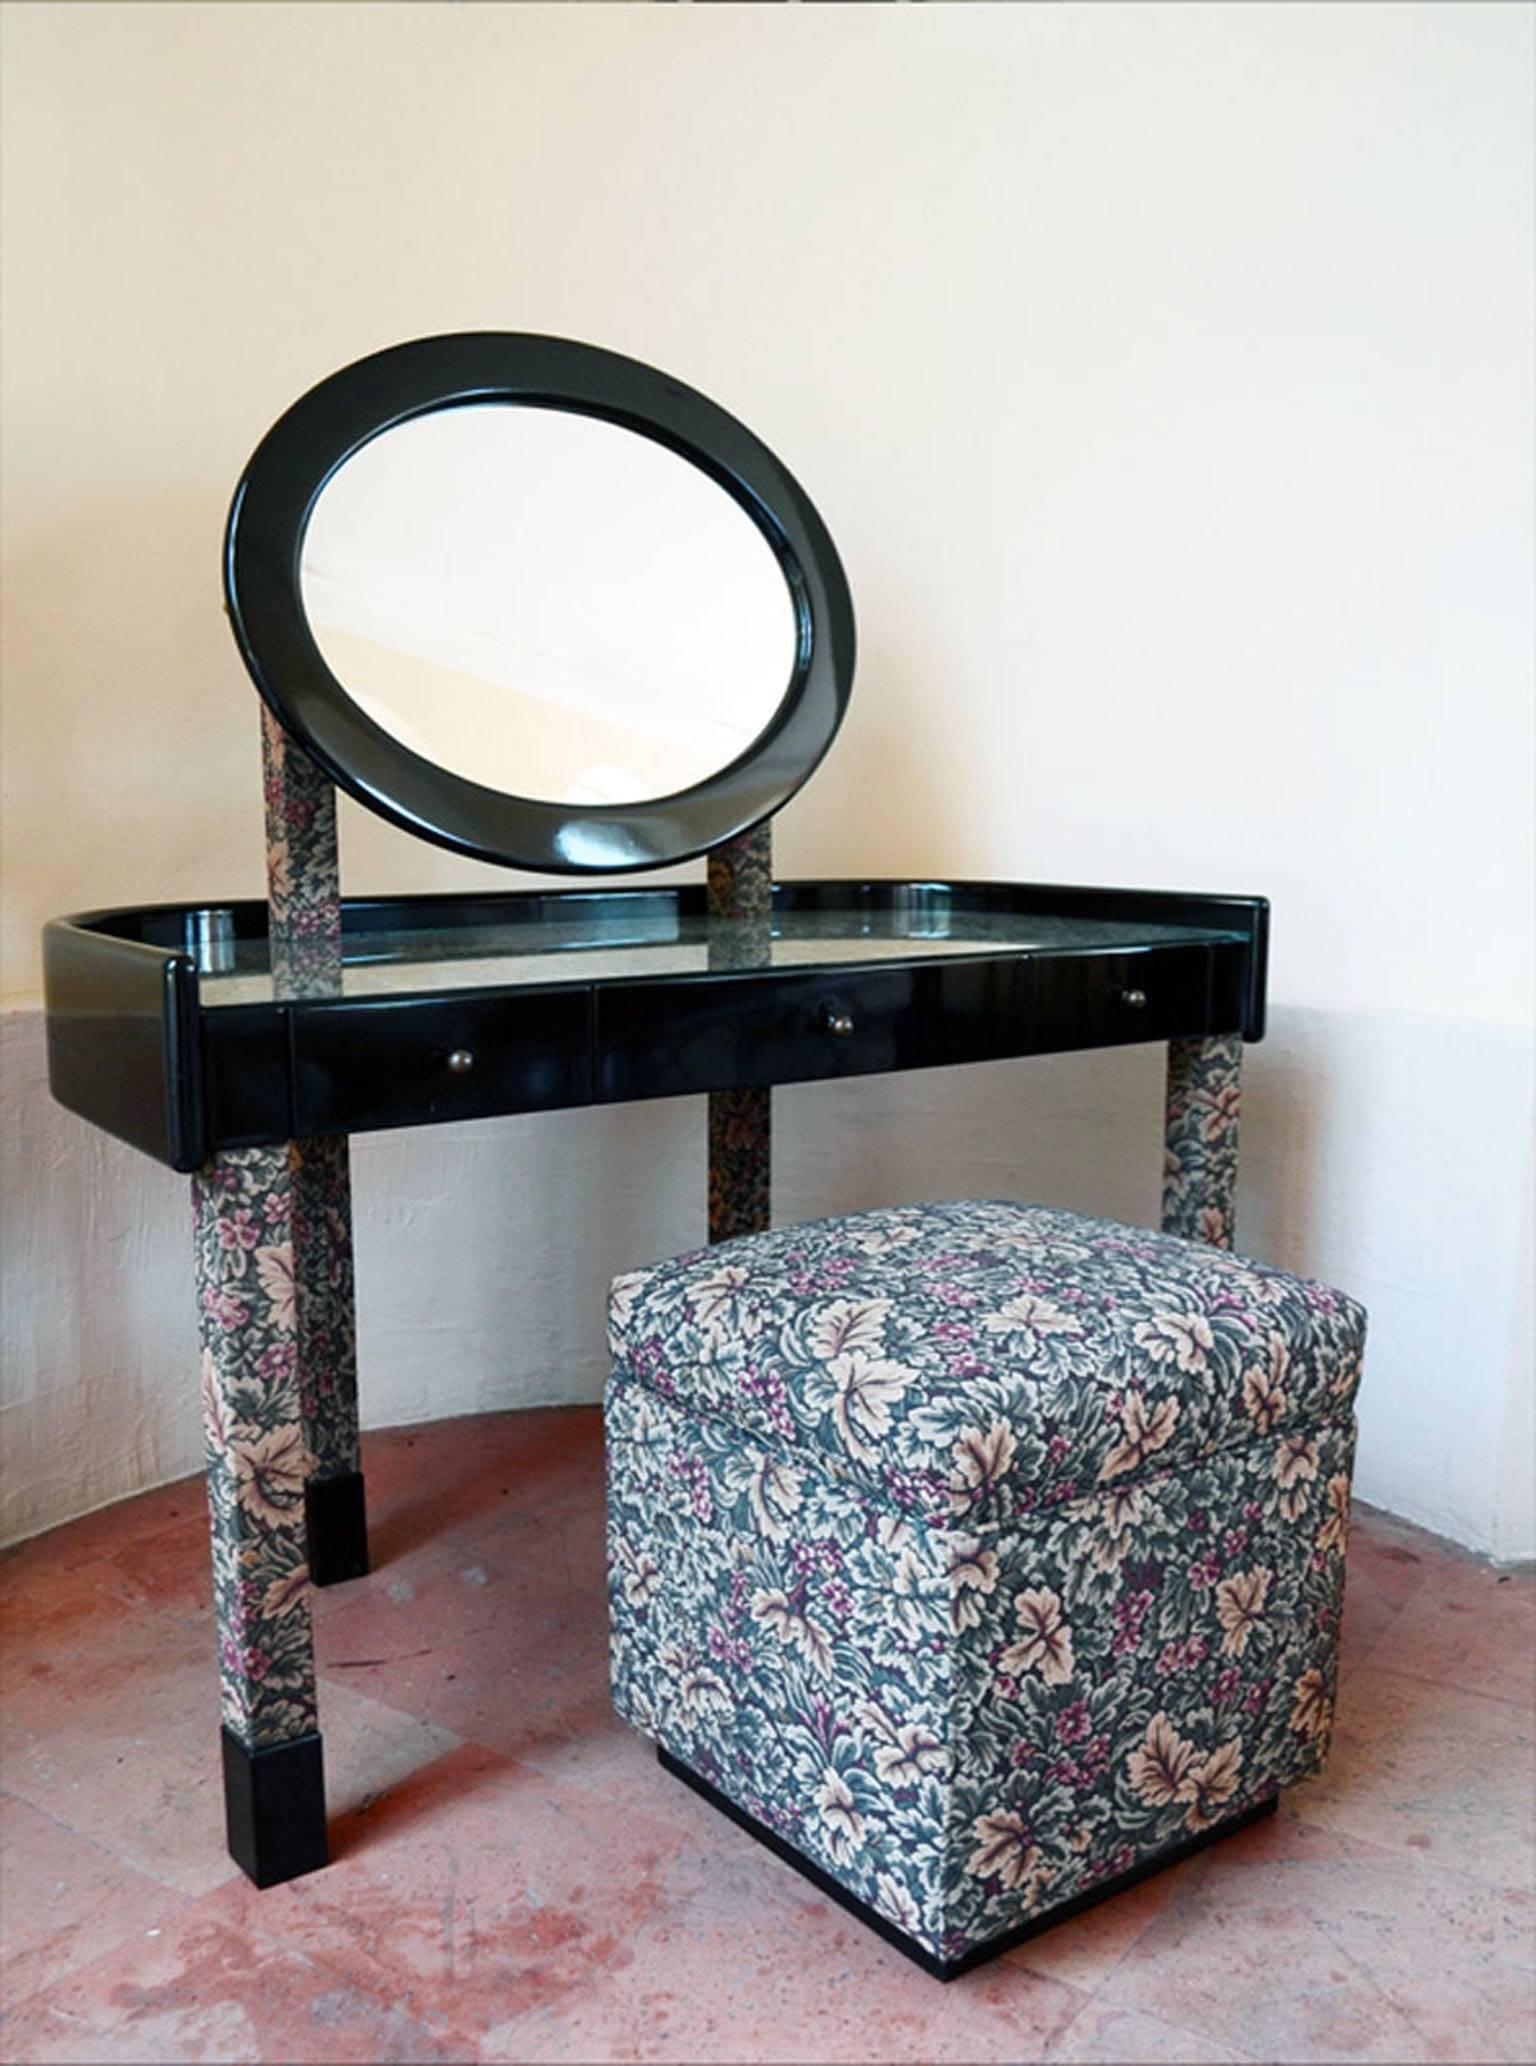 Mid-Century Modern Toilette with Pouf in Brocade Design Franco Maria Ricci for SCIC, 1980s For Sale